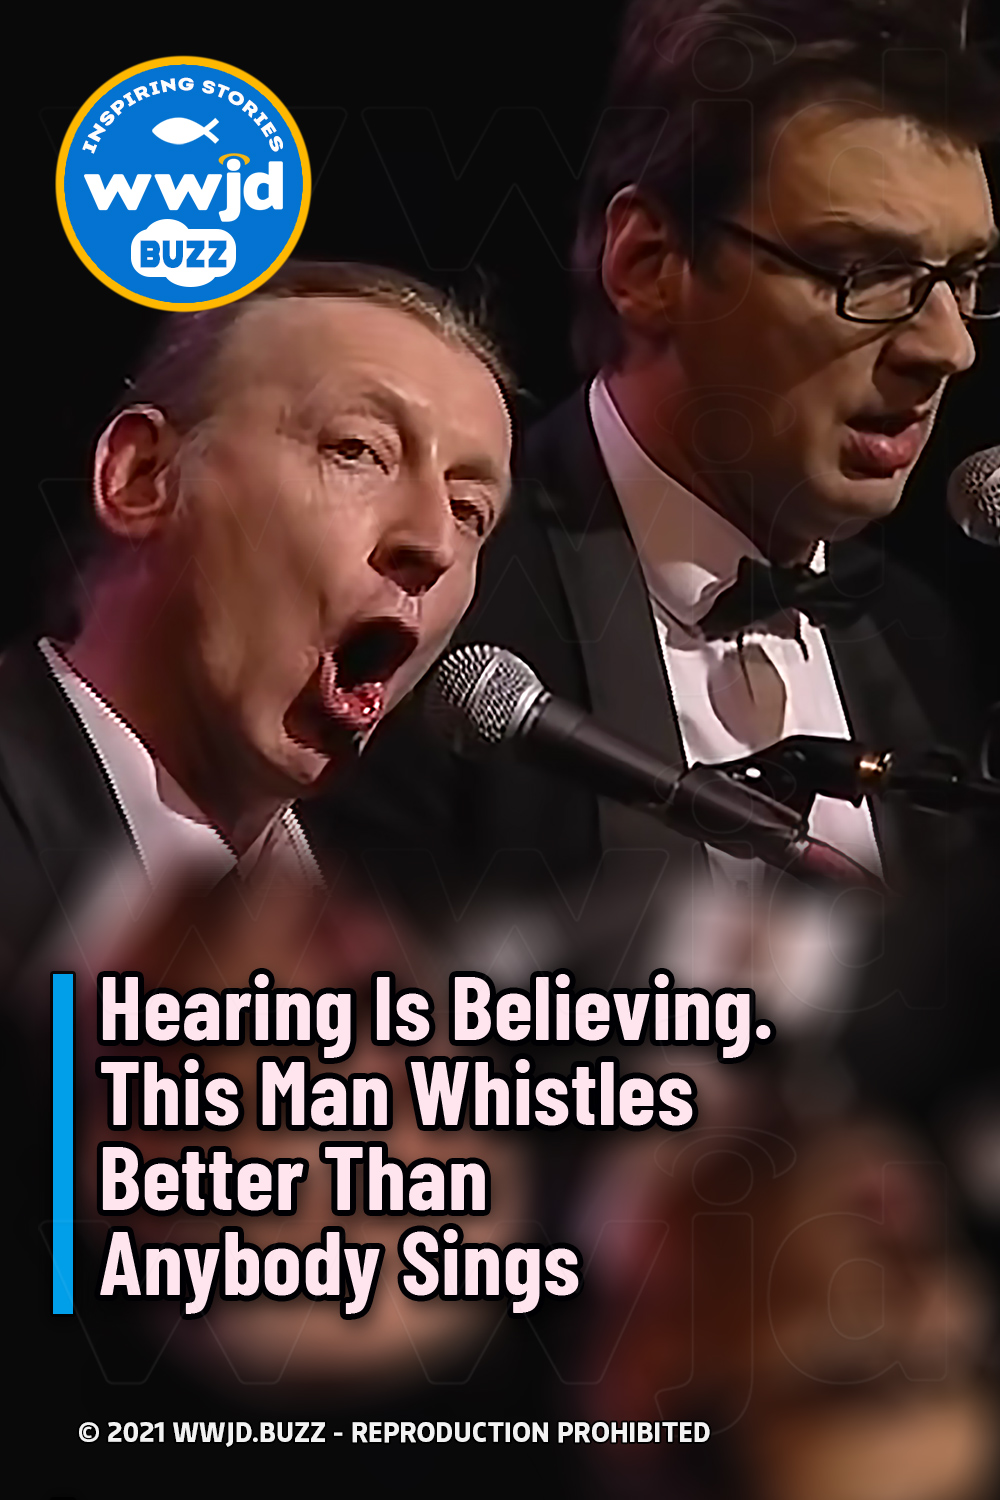 Hearing Is Believing. This Man Whistles Better Than Anybody Sings